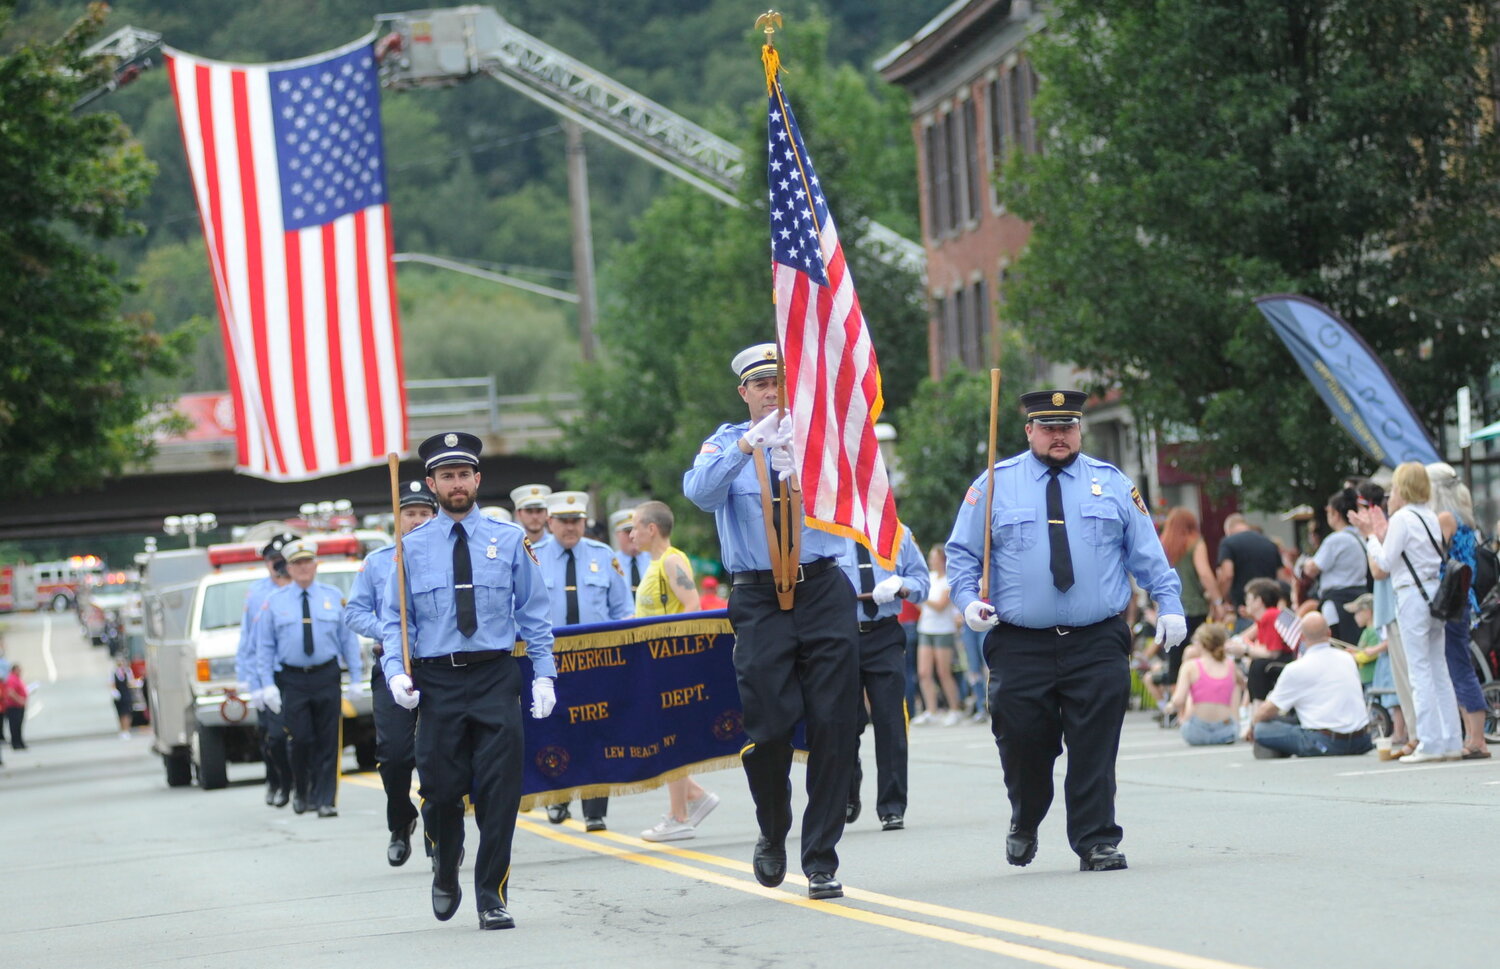 Members of the Beaverkill Valley Fire Department lead their contingent down Roscoe’s main street moments after passing beneath the giant American flag suspended over the roadway...